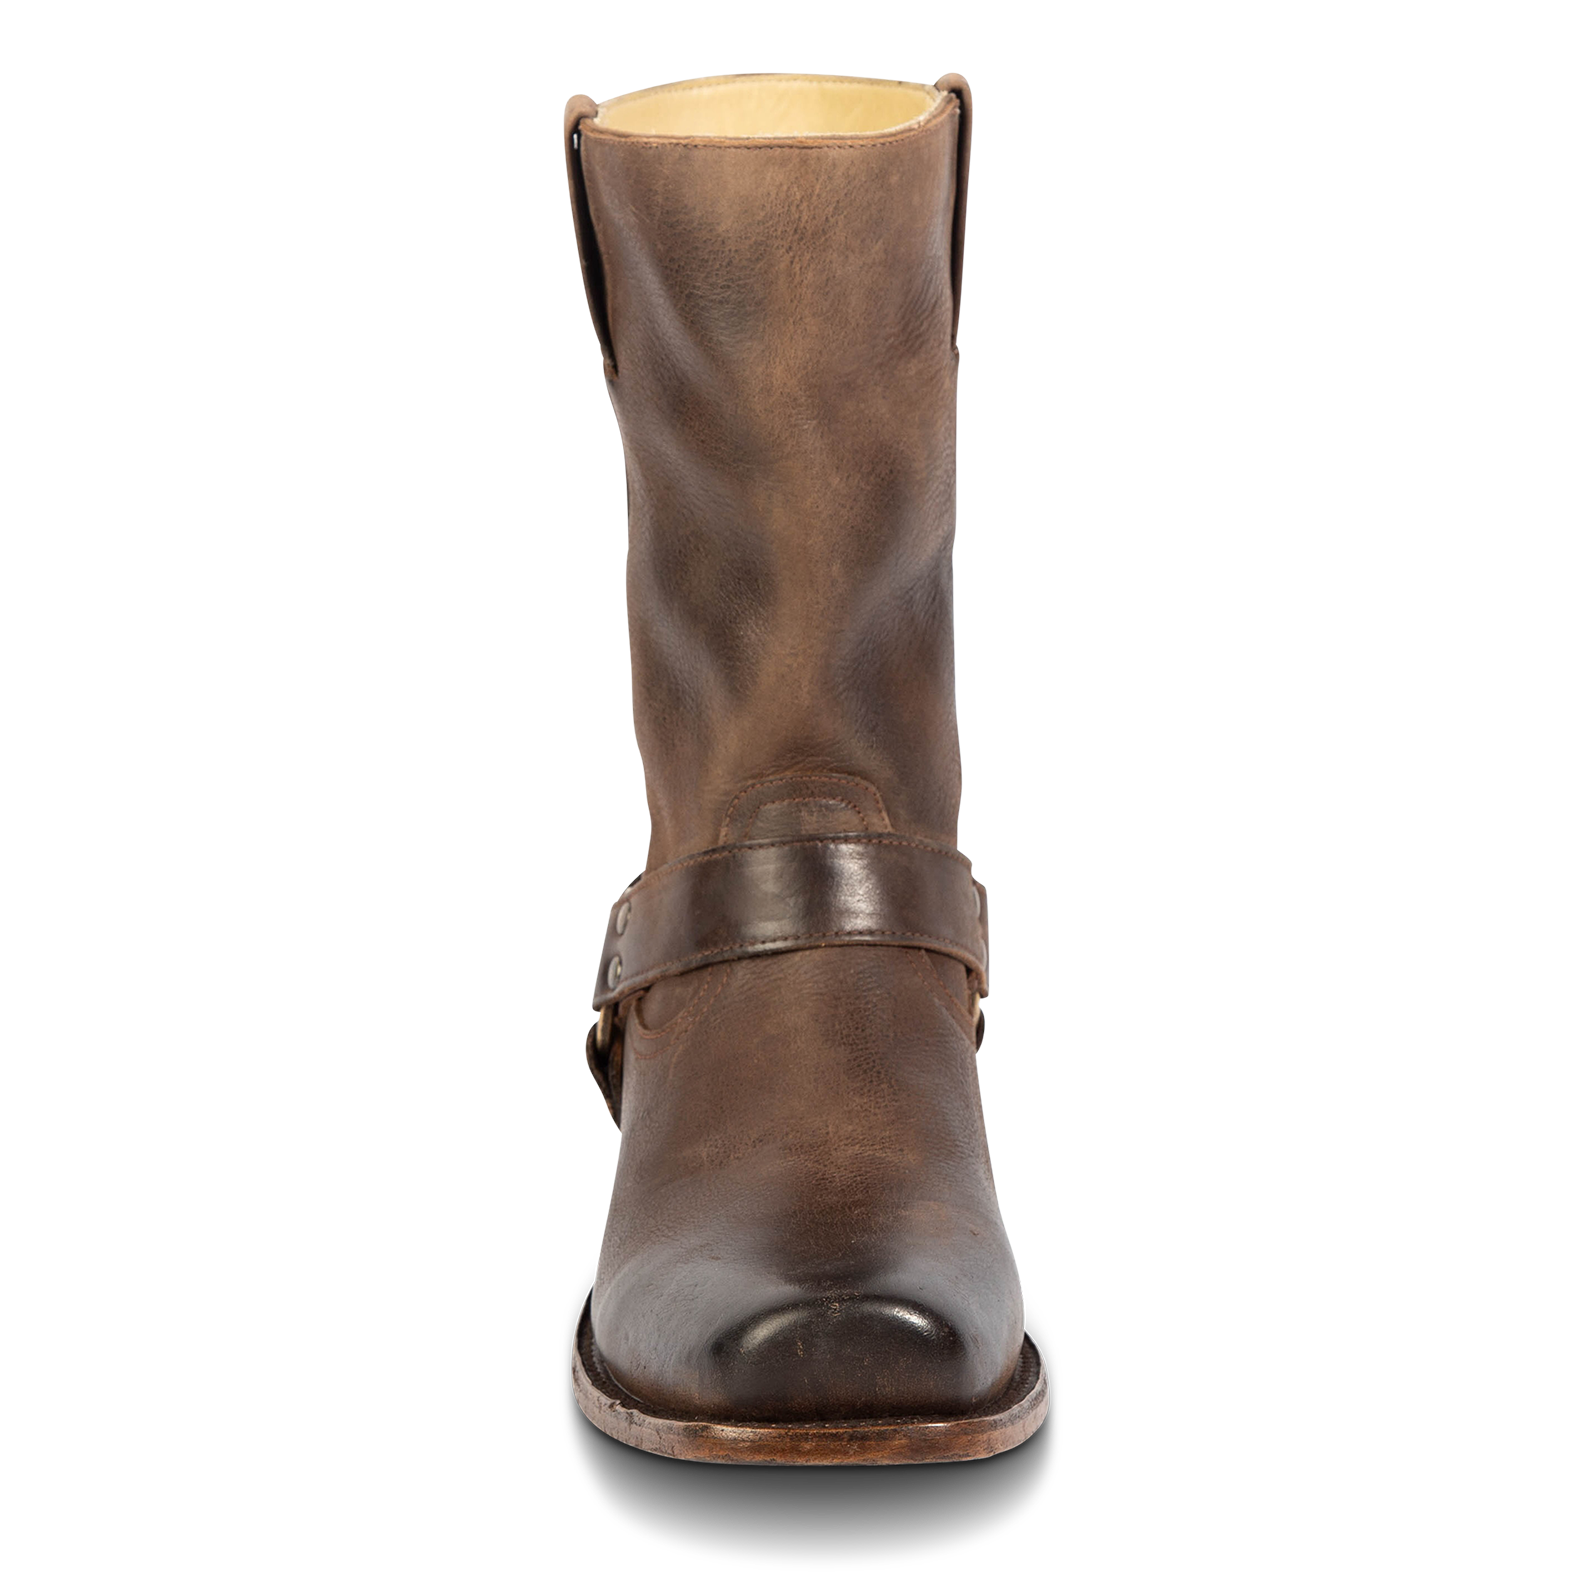 Front view showing distressed shaft and leather ankle harness on FREEBIRD men's Copperhead brown boot